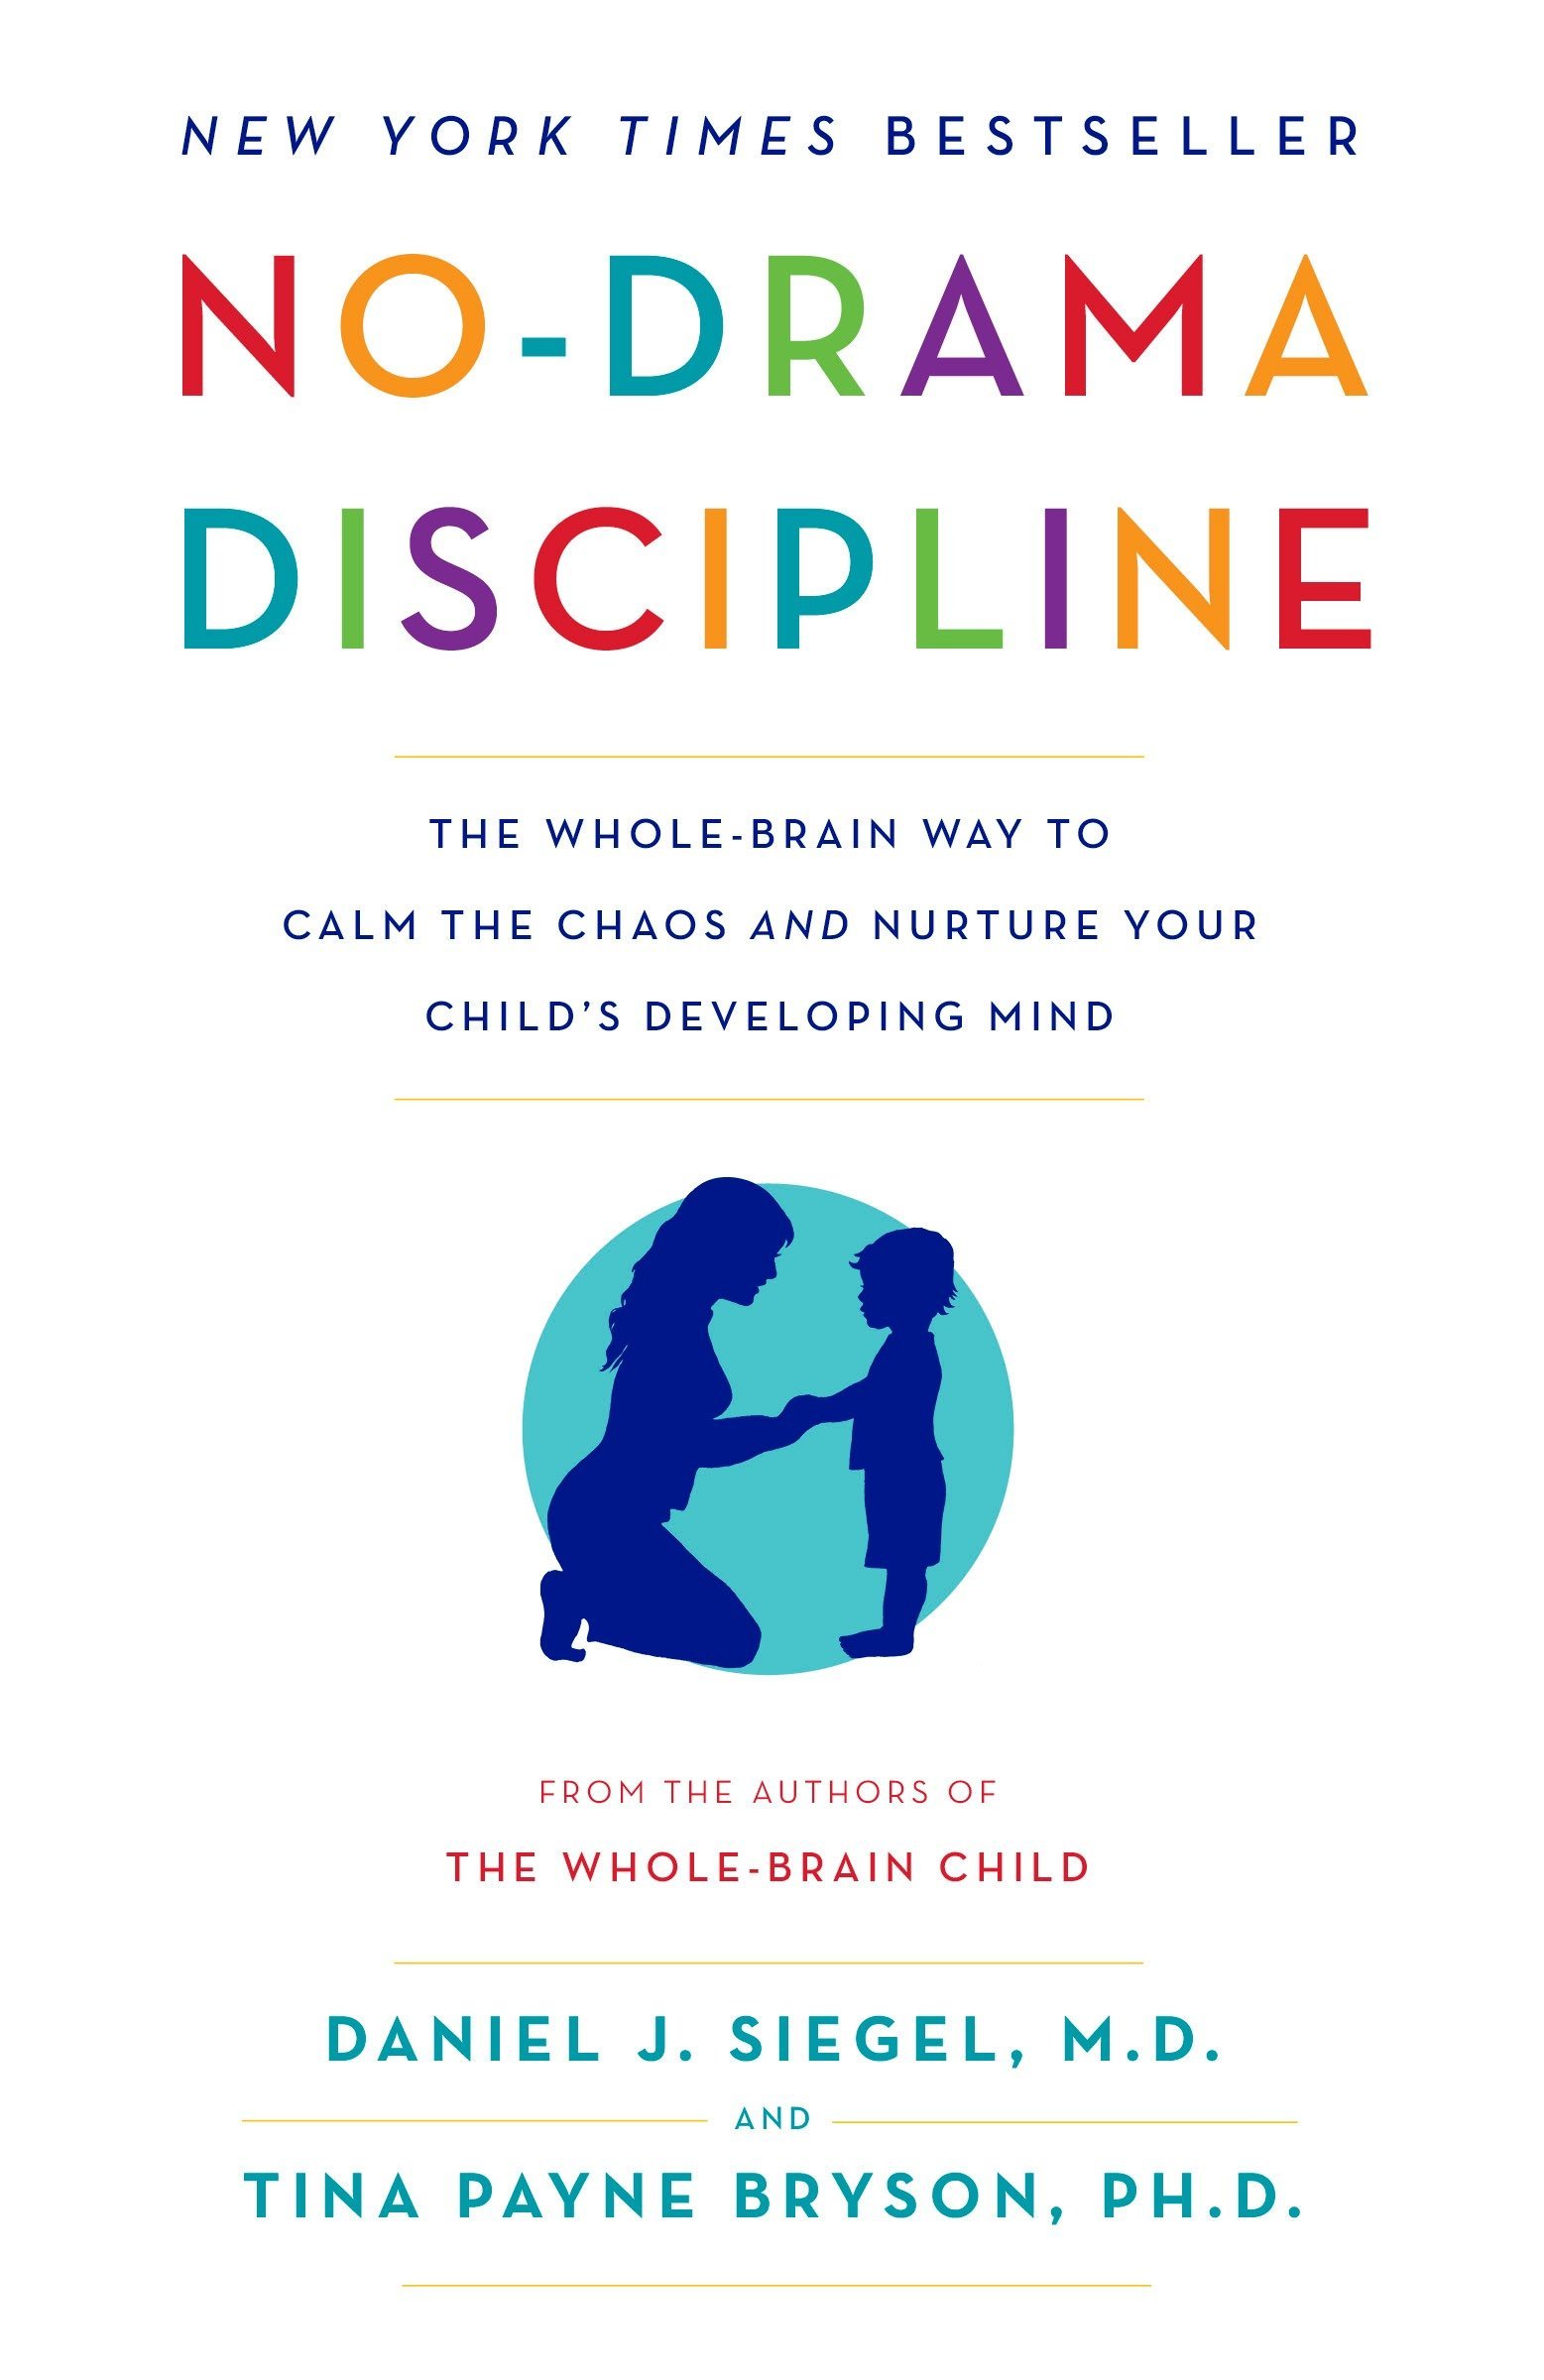 No-Drama Discipline: The Whole Brain Way to Calm the Chaos and Nurture Your Child’s Developing Mind – Daniel J. Siegel, M.D., & Tina Payne Bryson, PhD